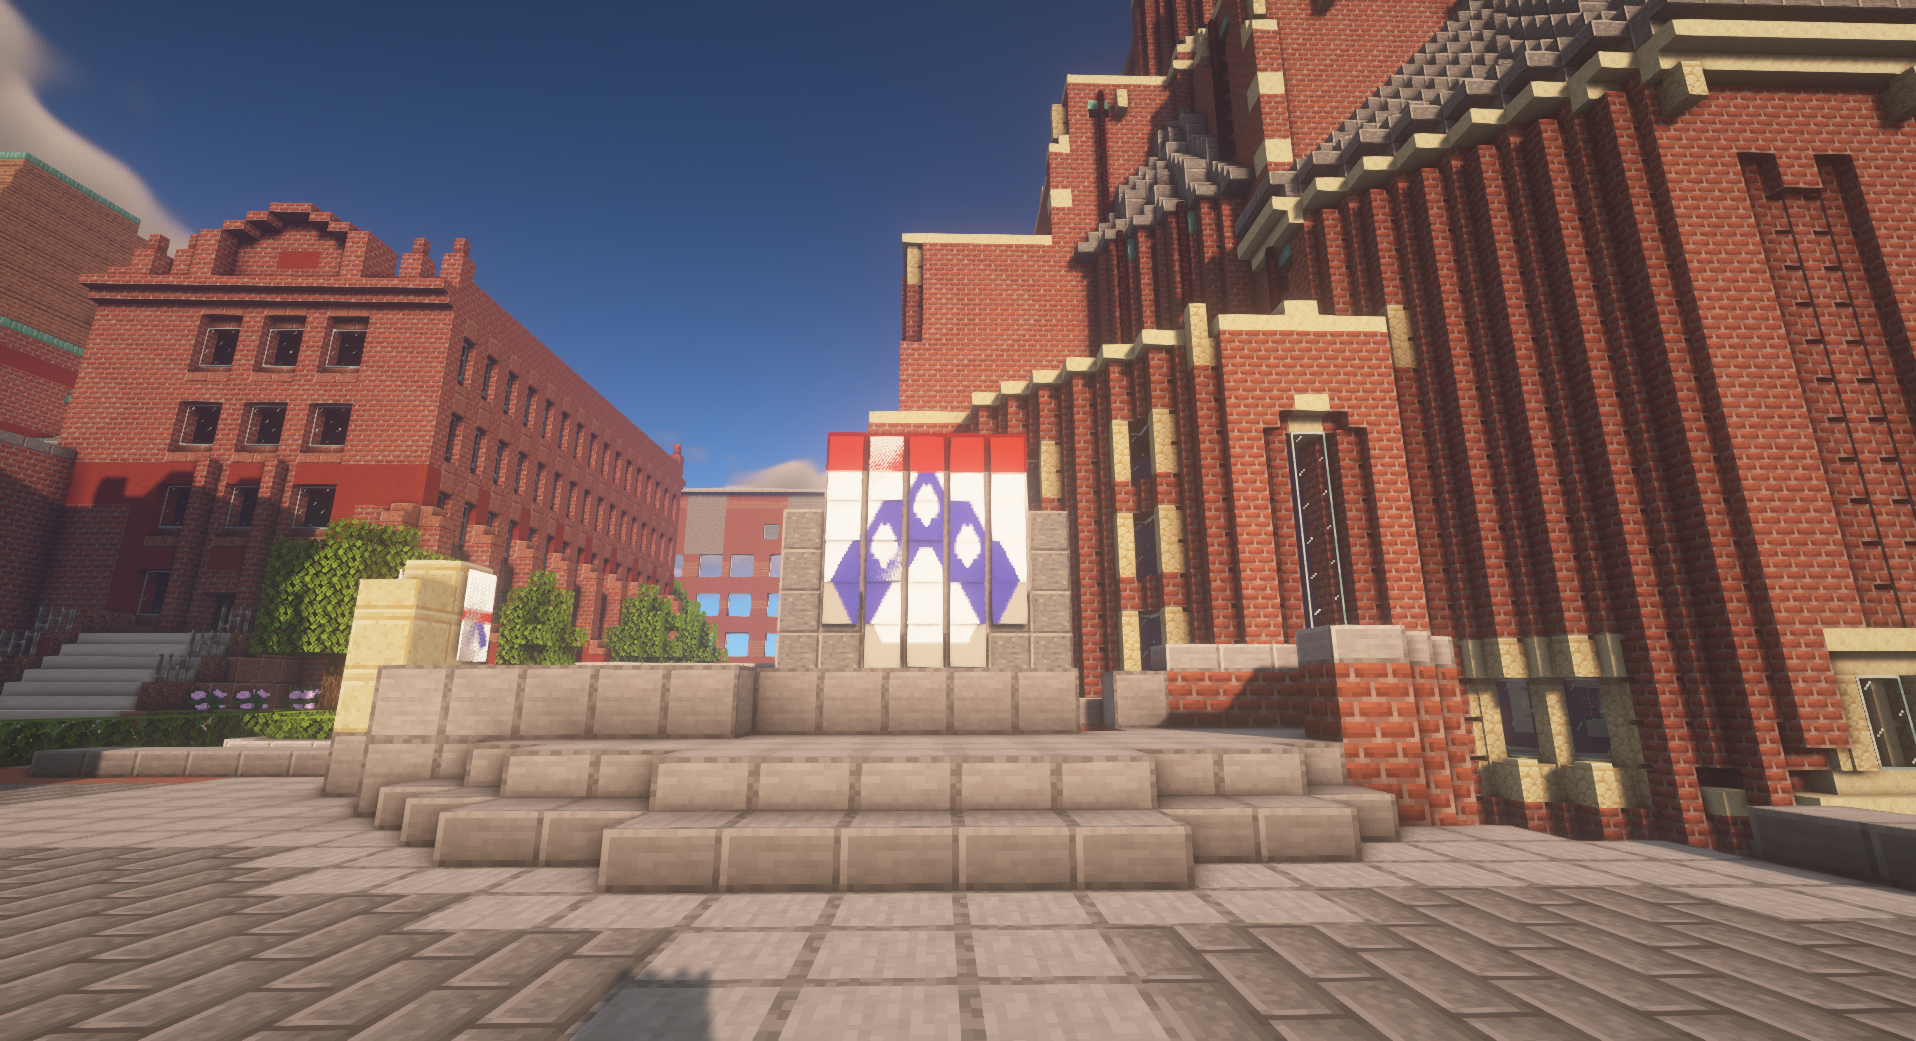 A digital and blocky version of the Quad in Minecraft featuring the Penn logo